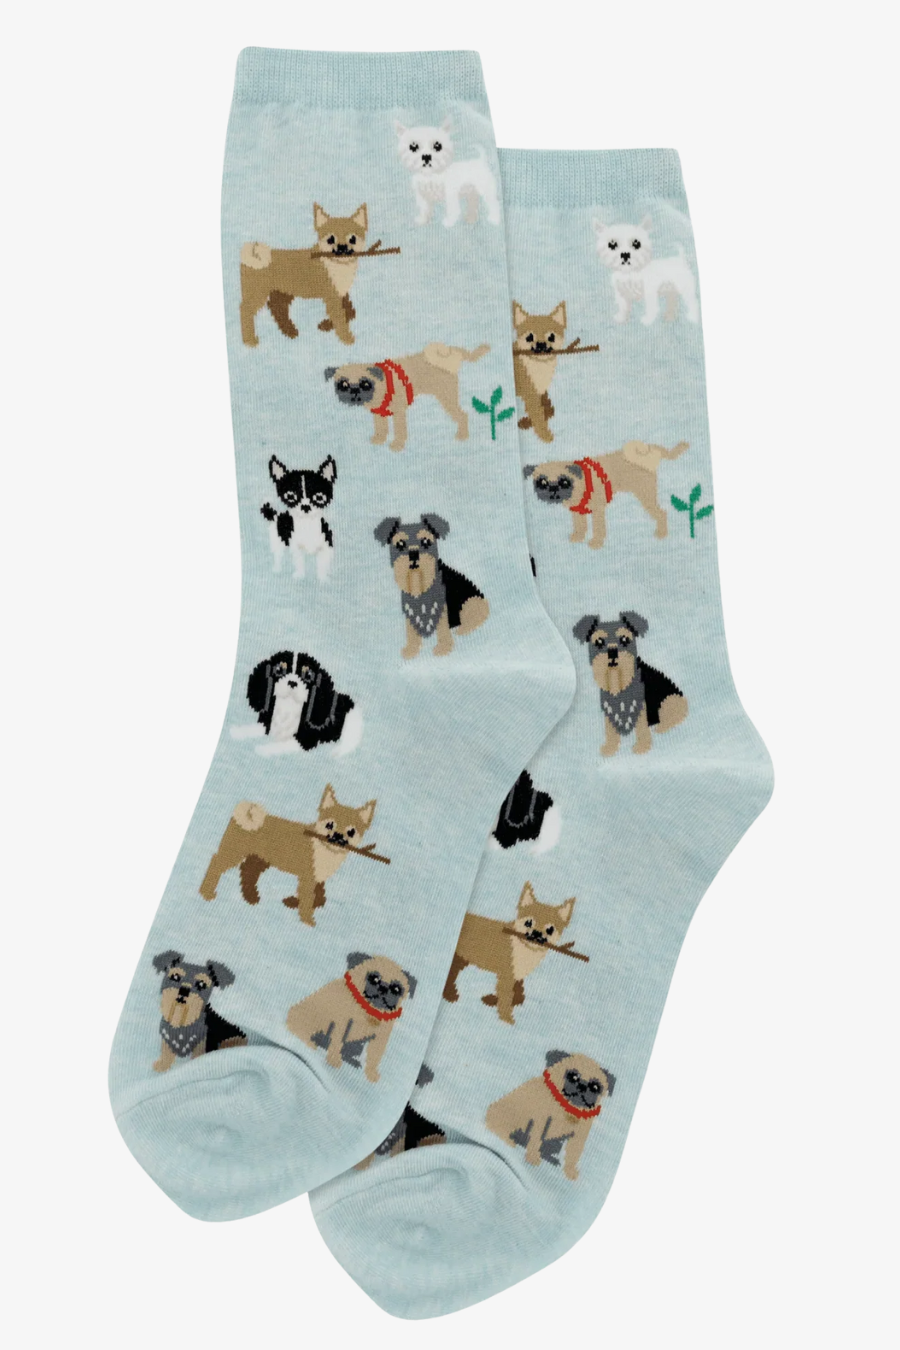 Dogs of the World Socks